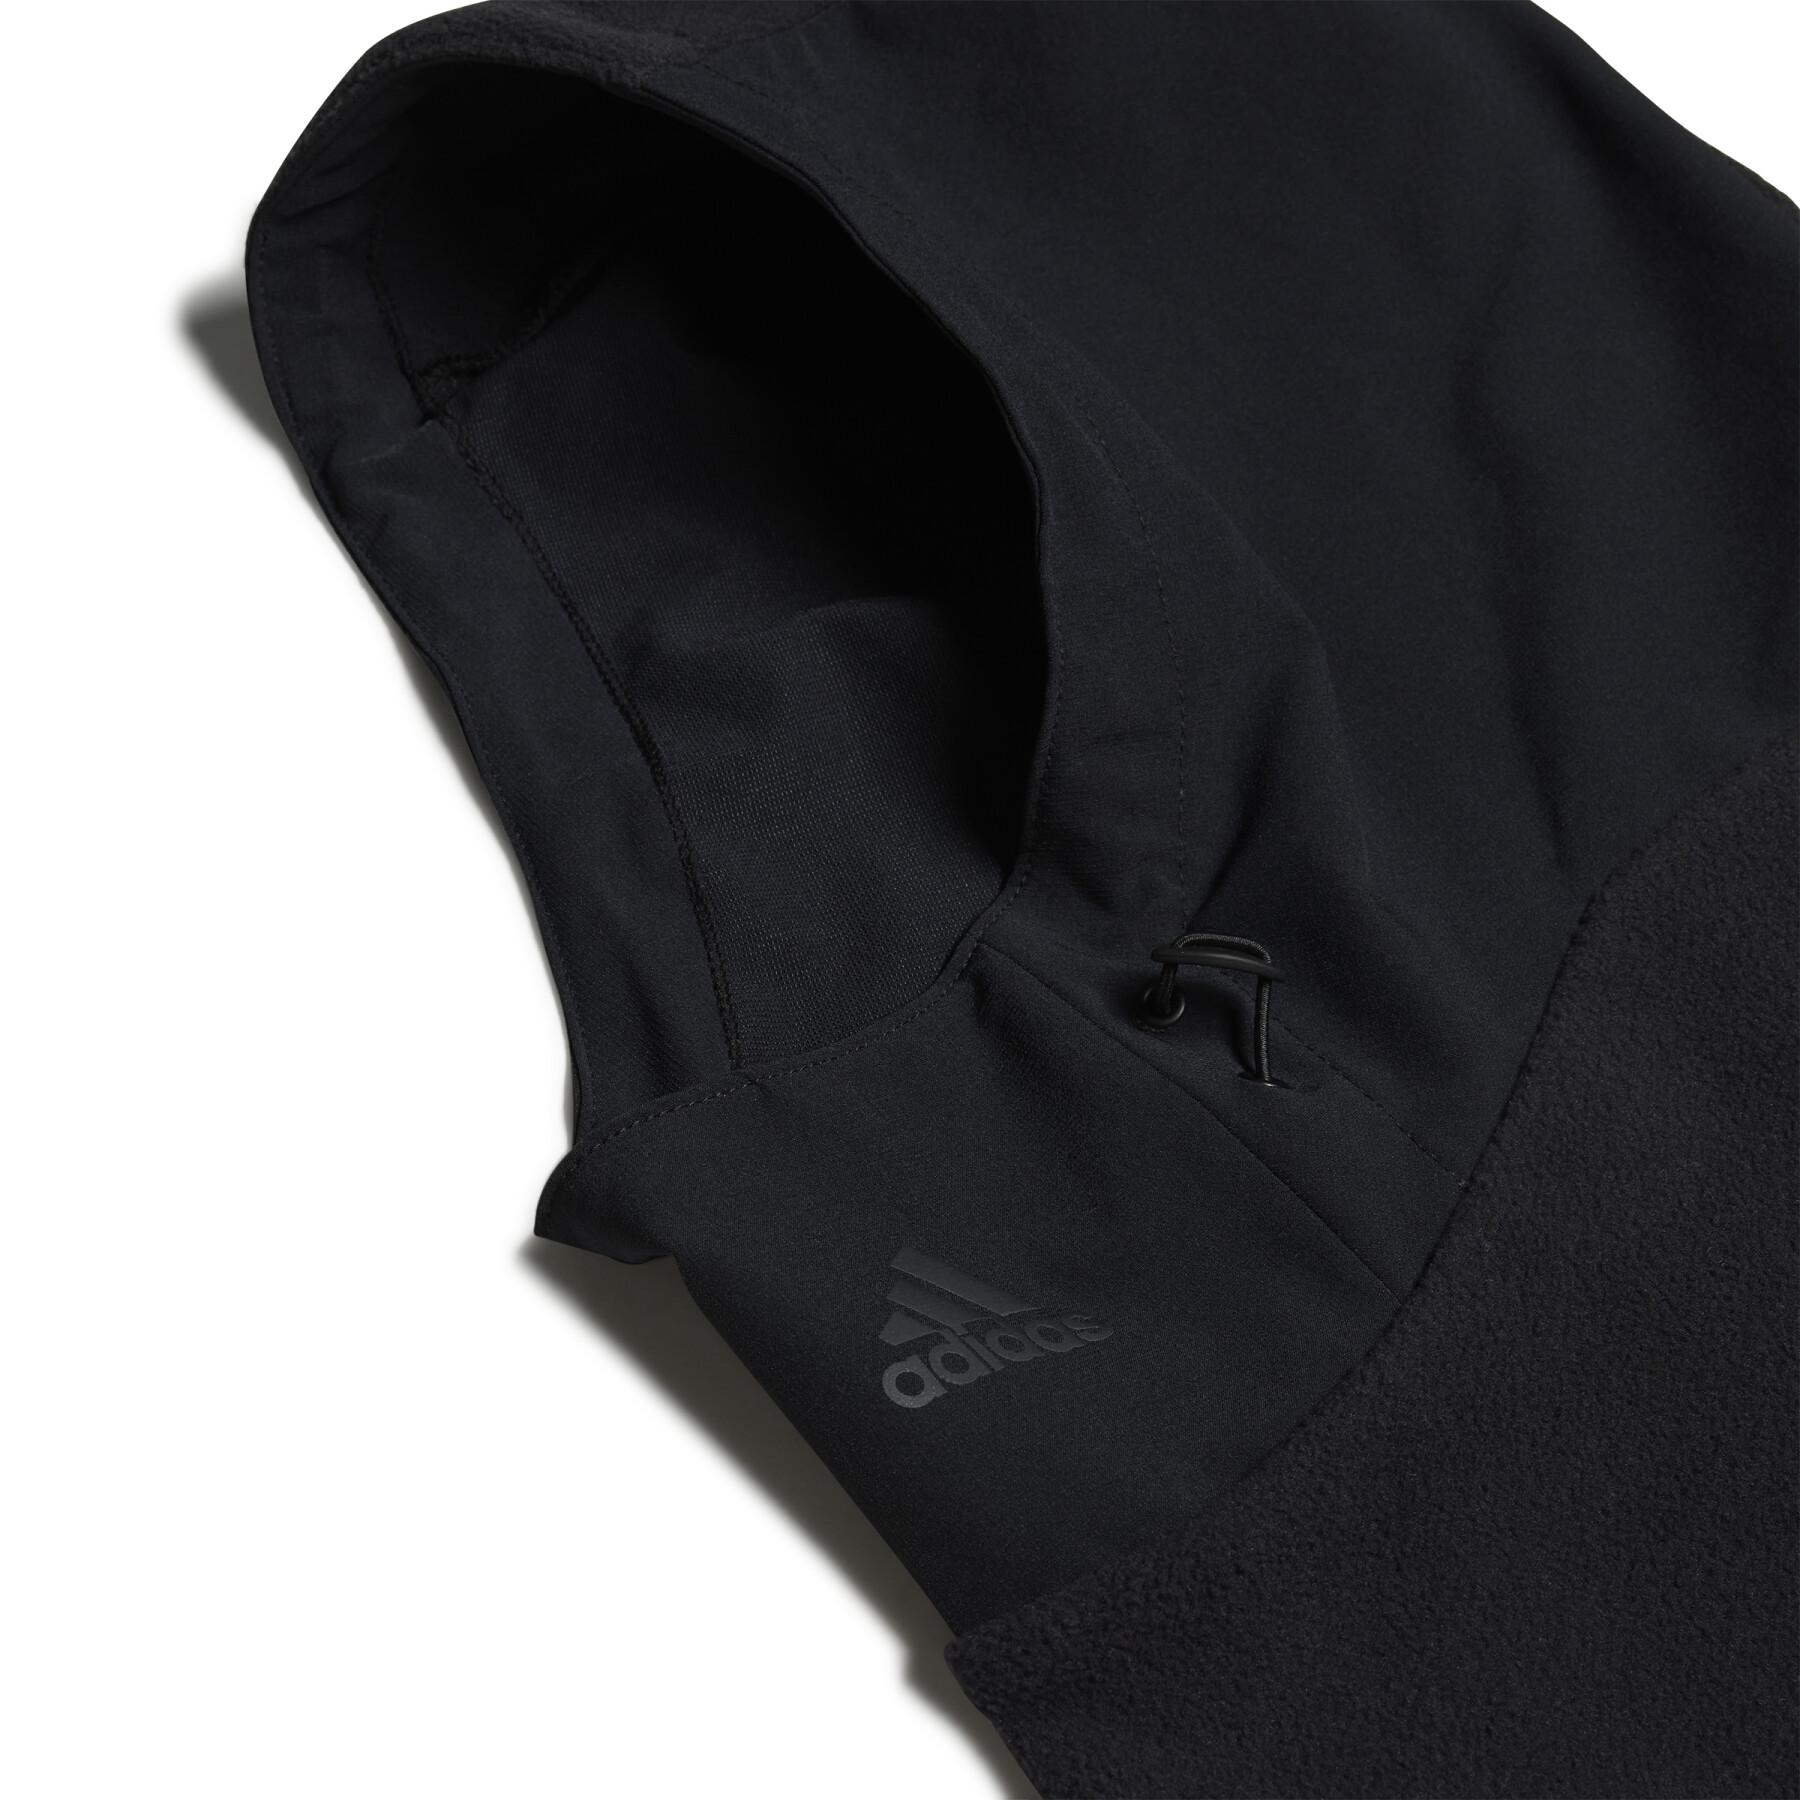 Neck cover with hood adidas X-city Cold.dry